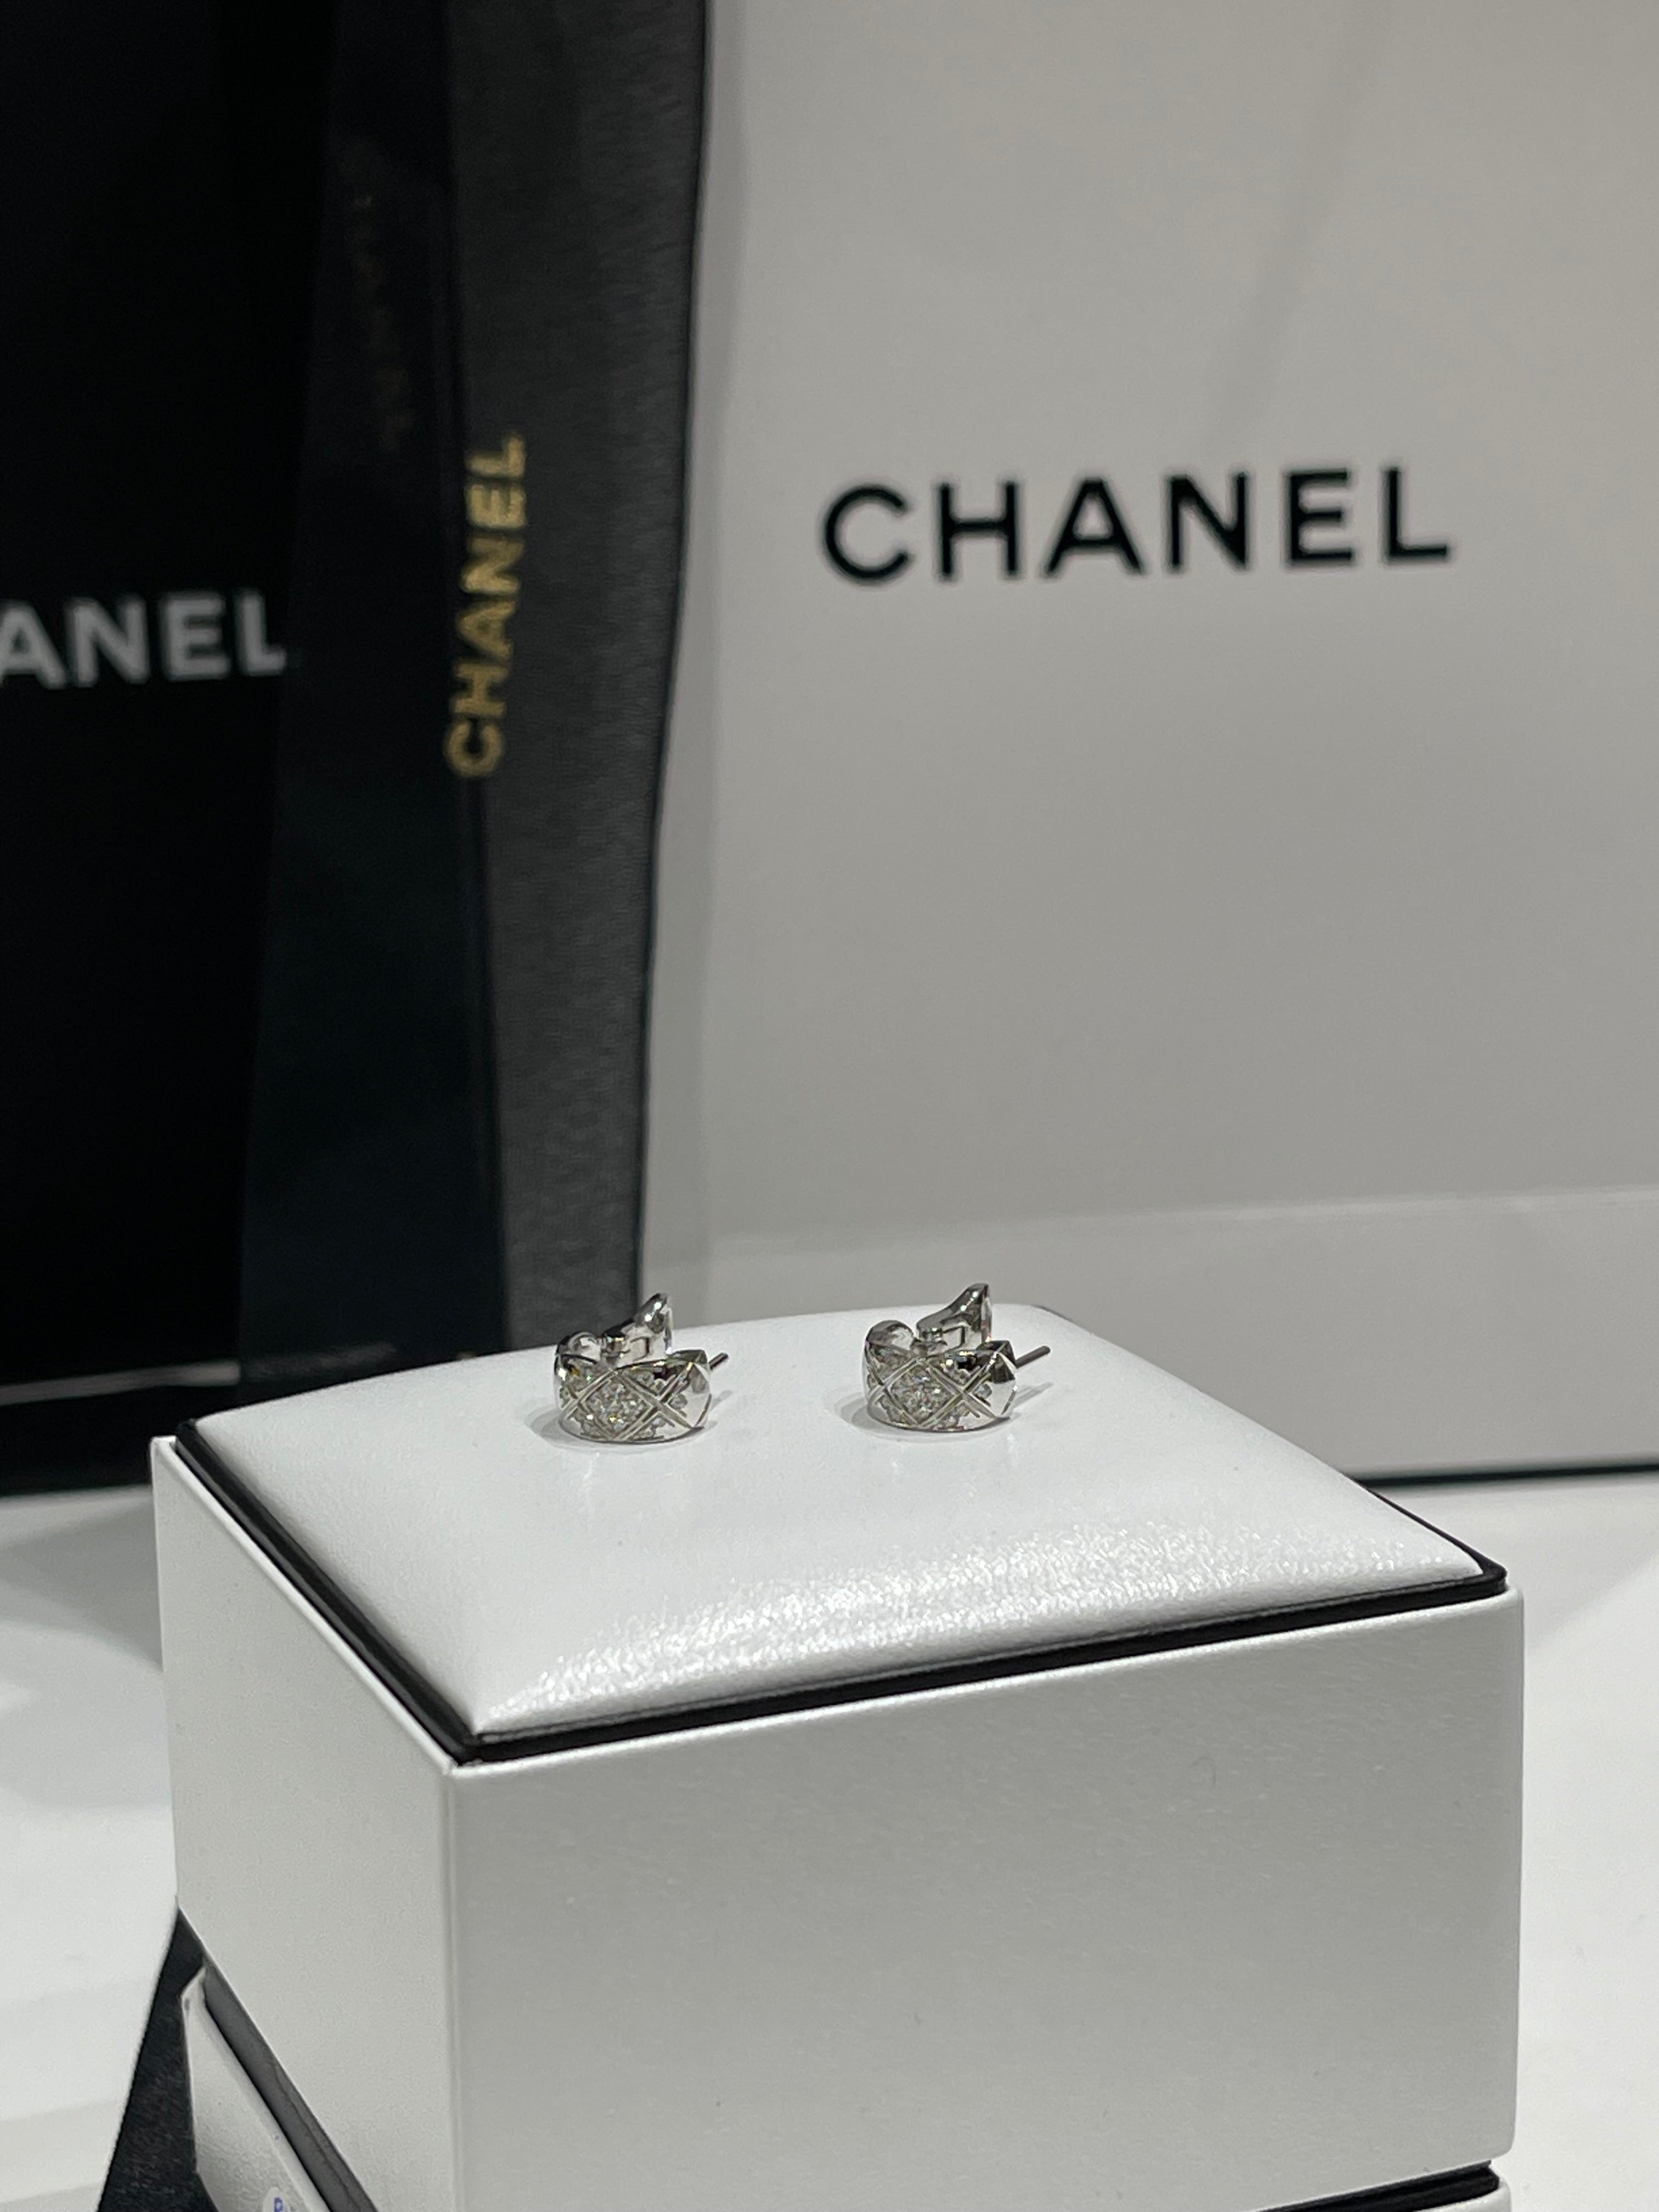 Chanel - Coco crush earrings in white gold and diamonds